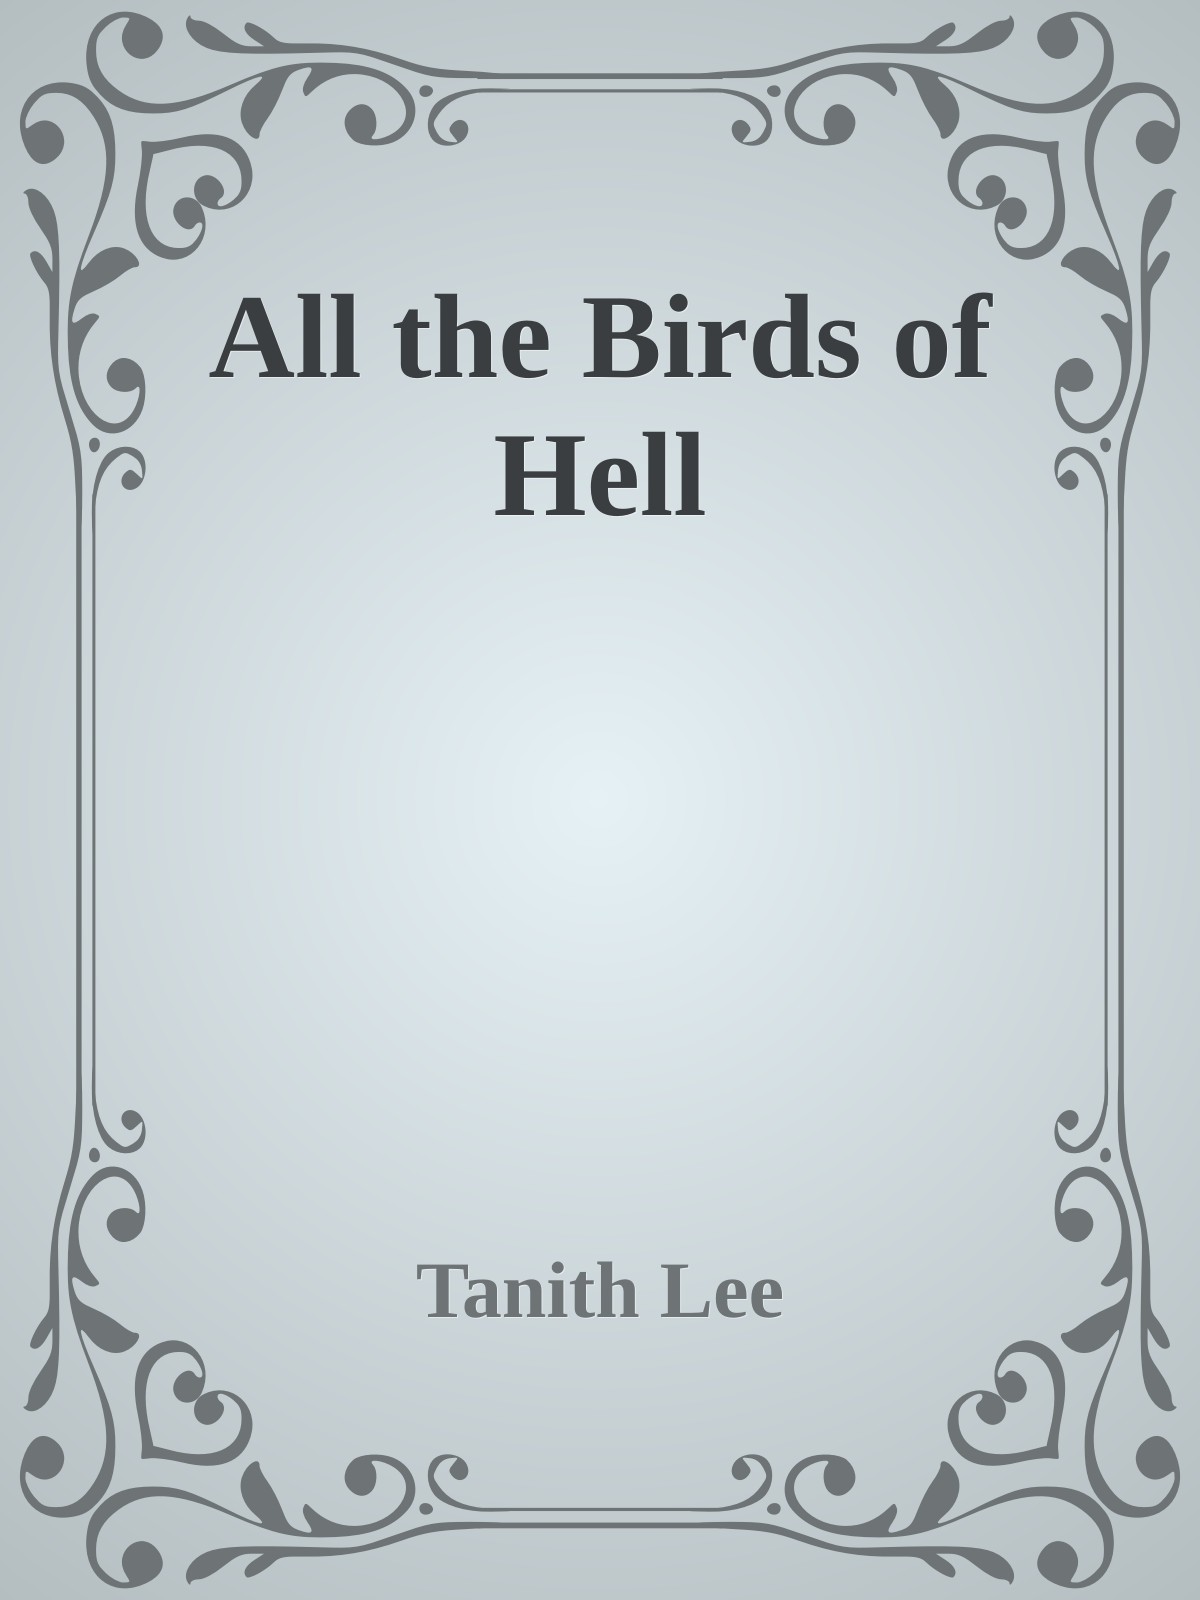 All the Birds of Hell